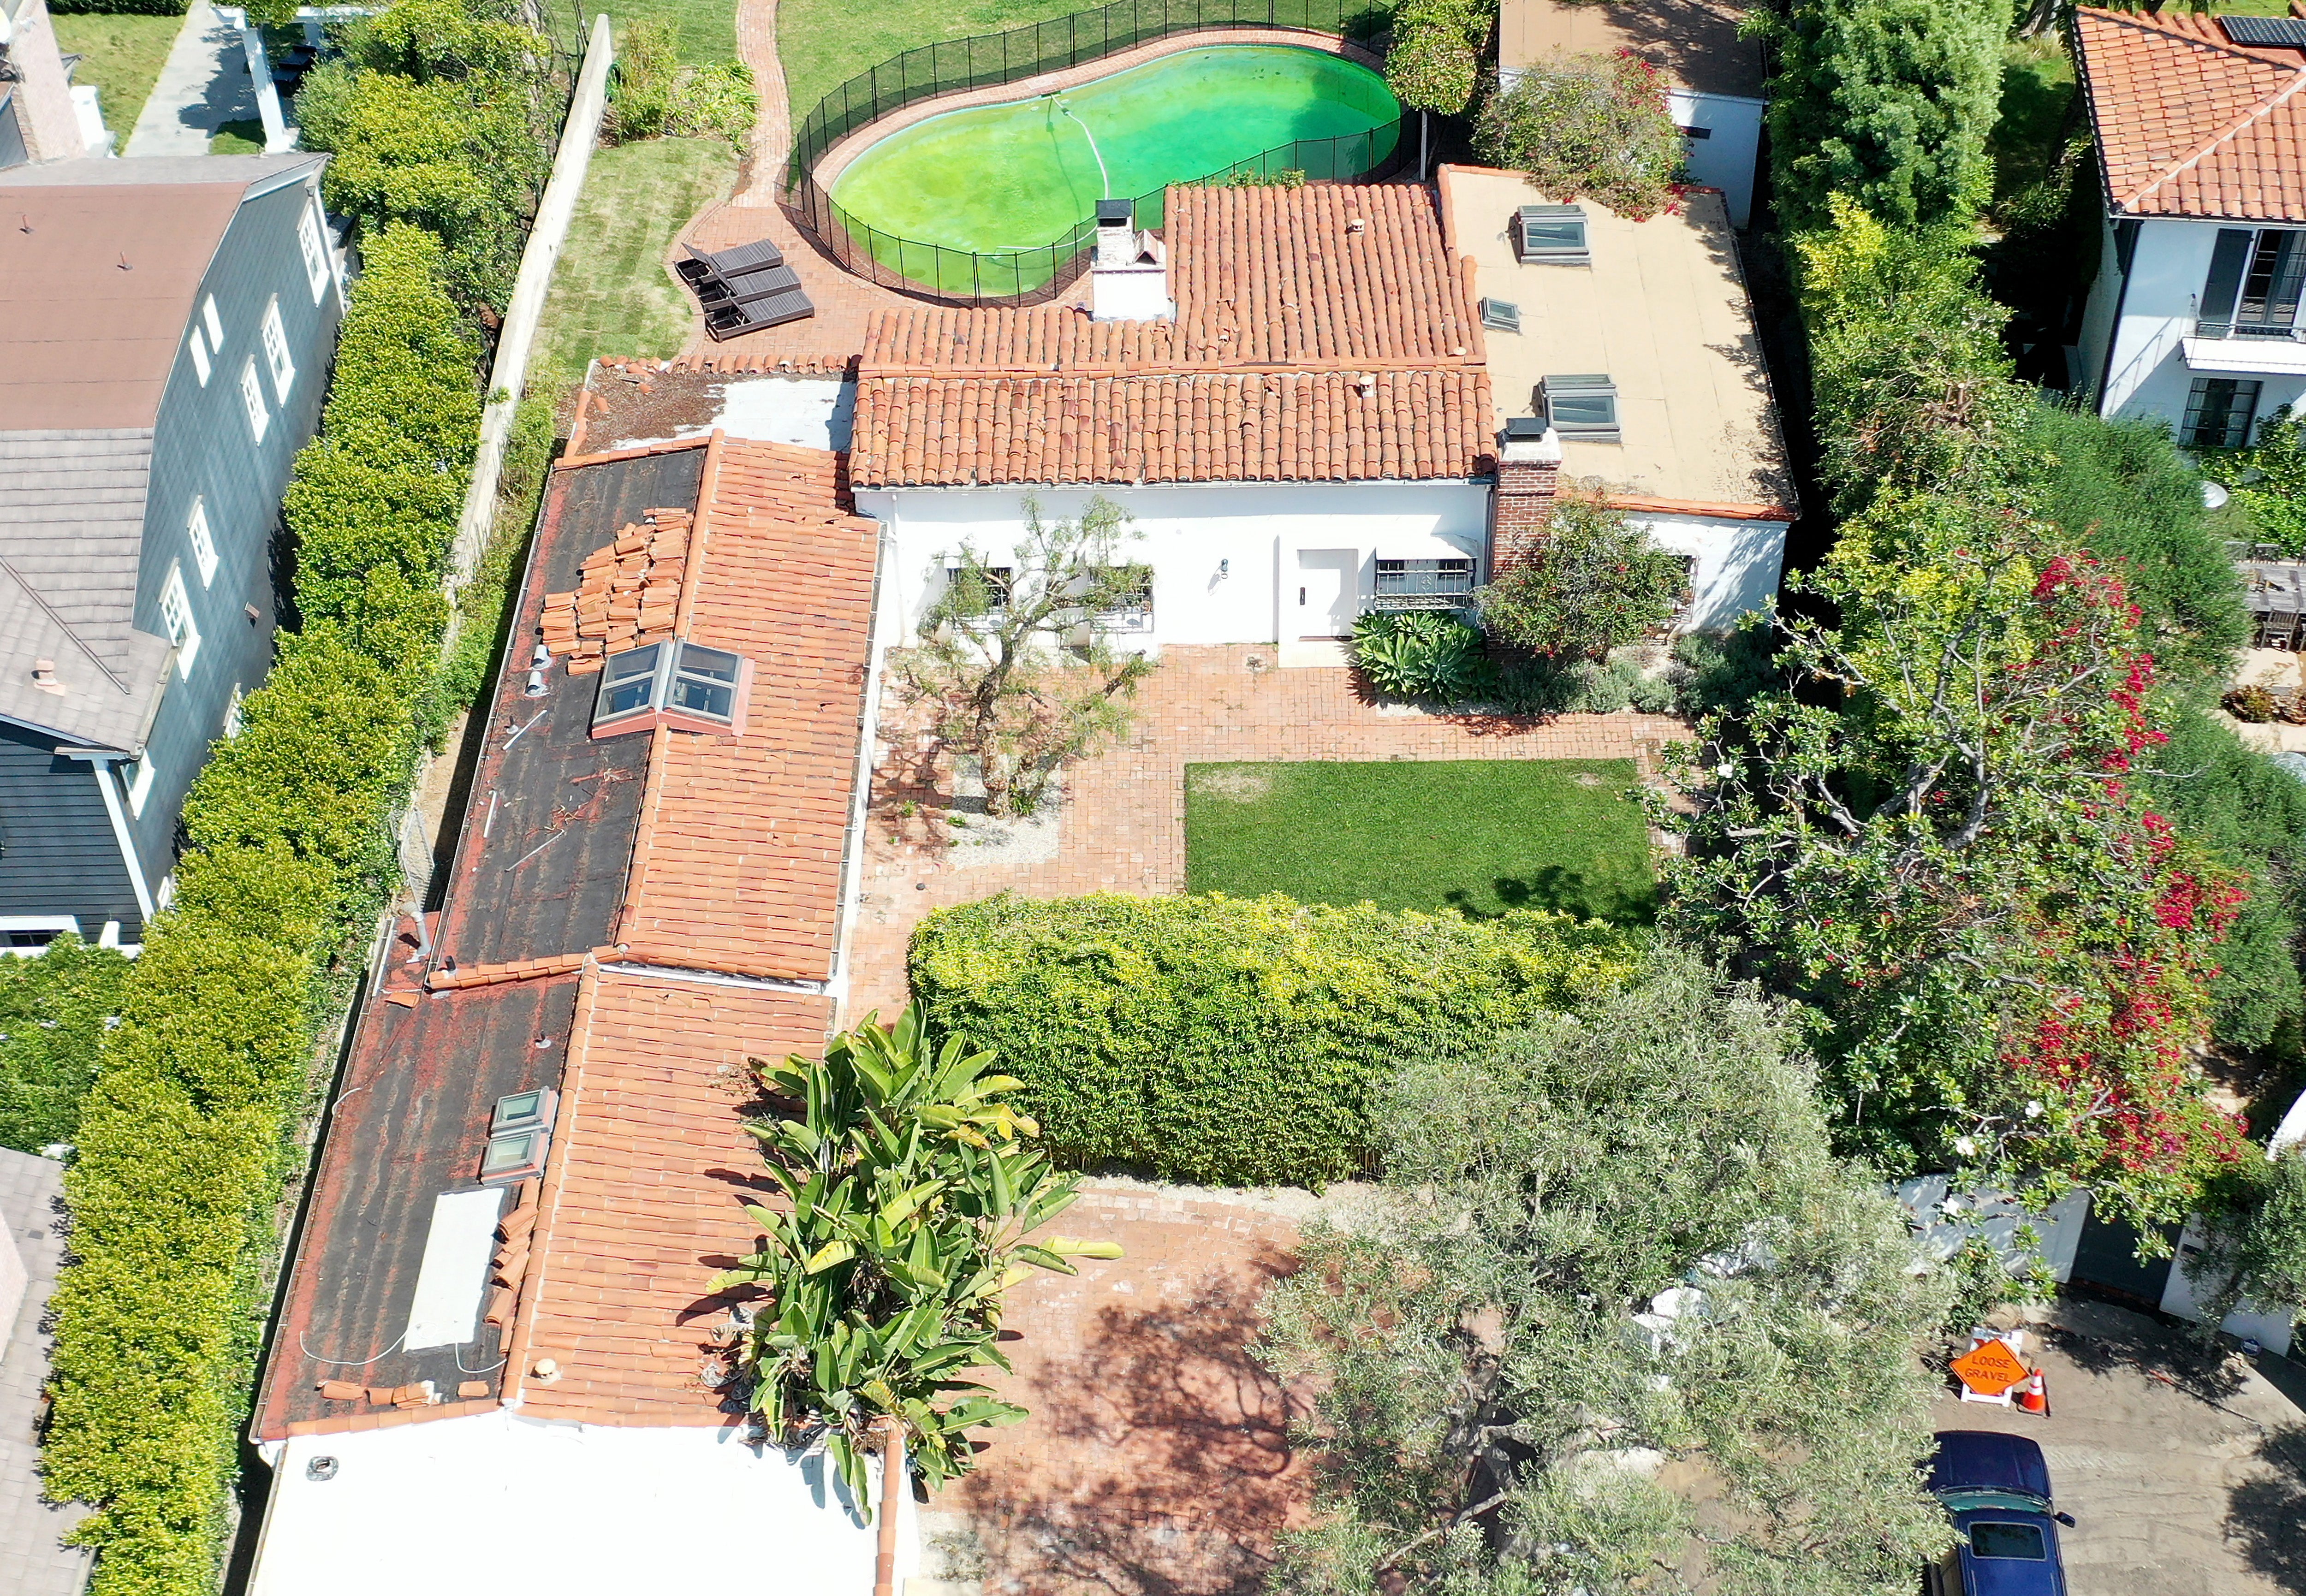 An aerial view of Marilyn Monroe’s former home in Los Angeles, California. The current homeowners are suing the city for the right to demolish it